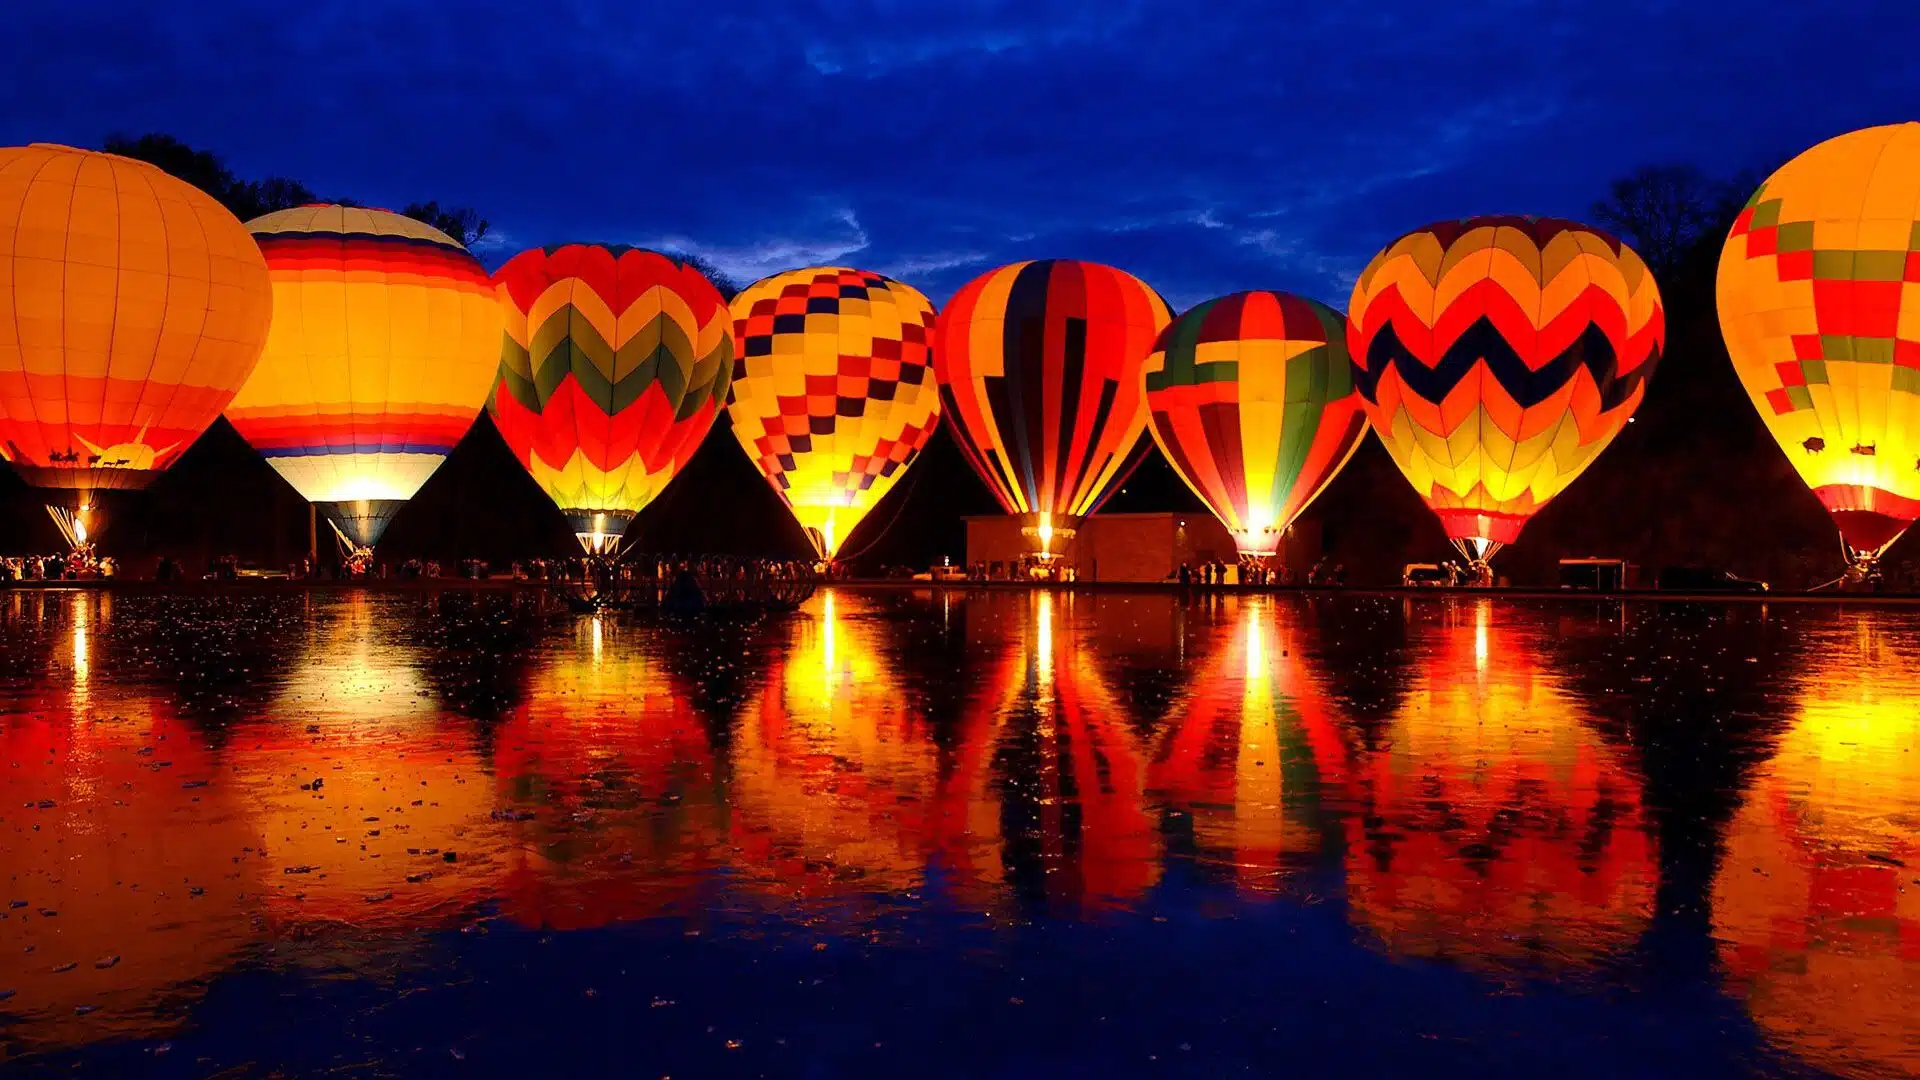 night scene of illuminated colorful balloons along a lake in Quechee vermont|several colorful balloons floating against a blue sky